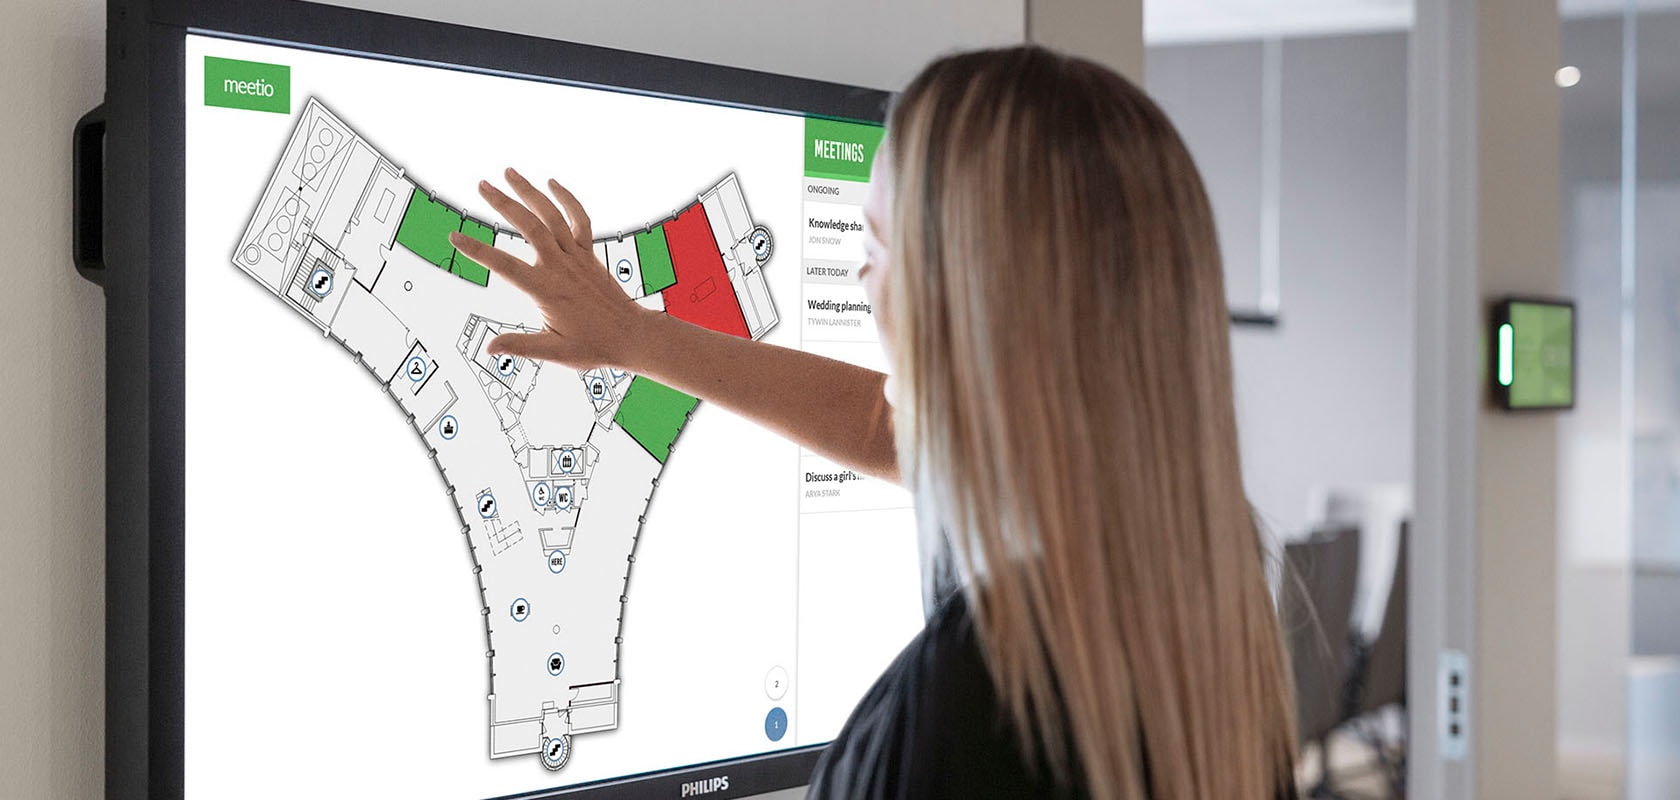 Interactive touch screen with floor plan maps